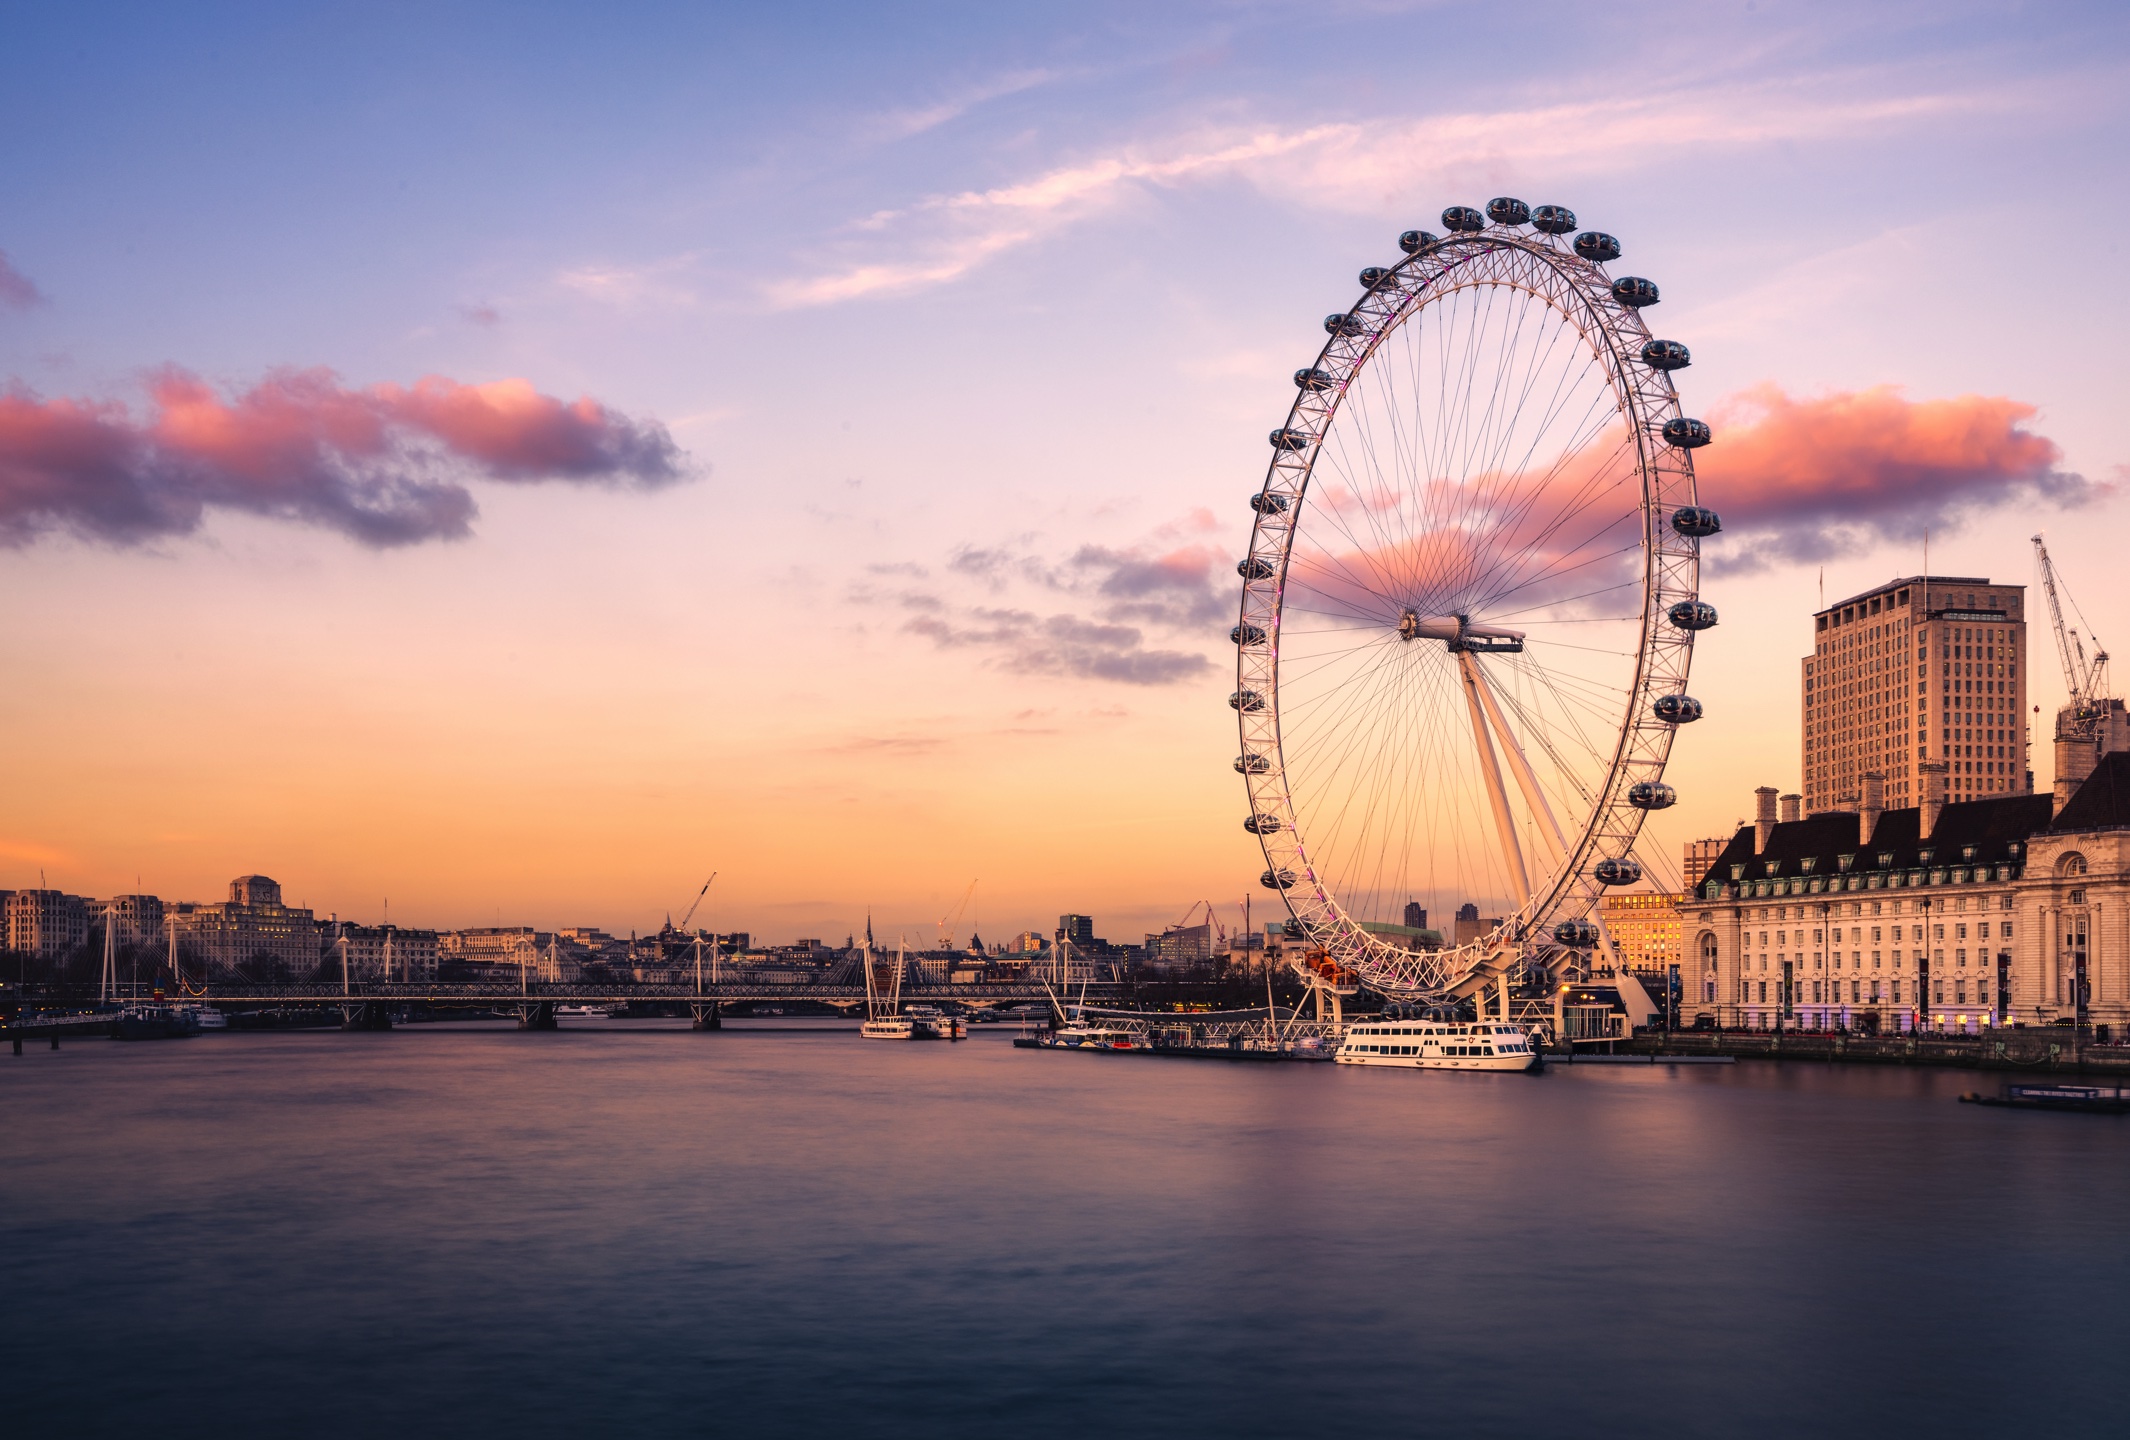 Photo of the London Eye in London, with a sunset in the background.